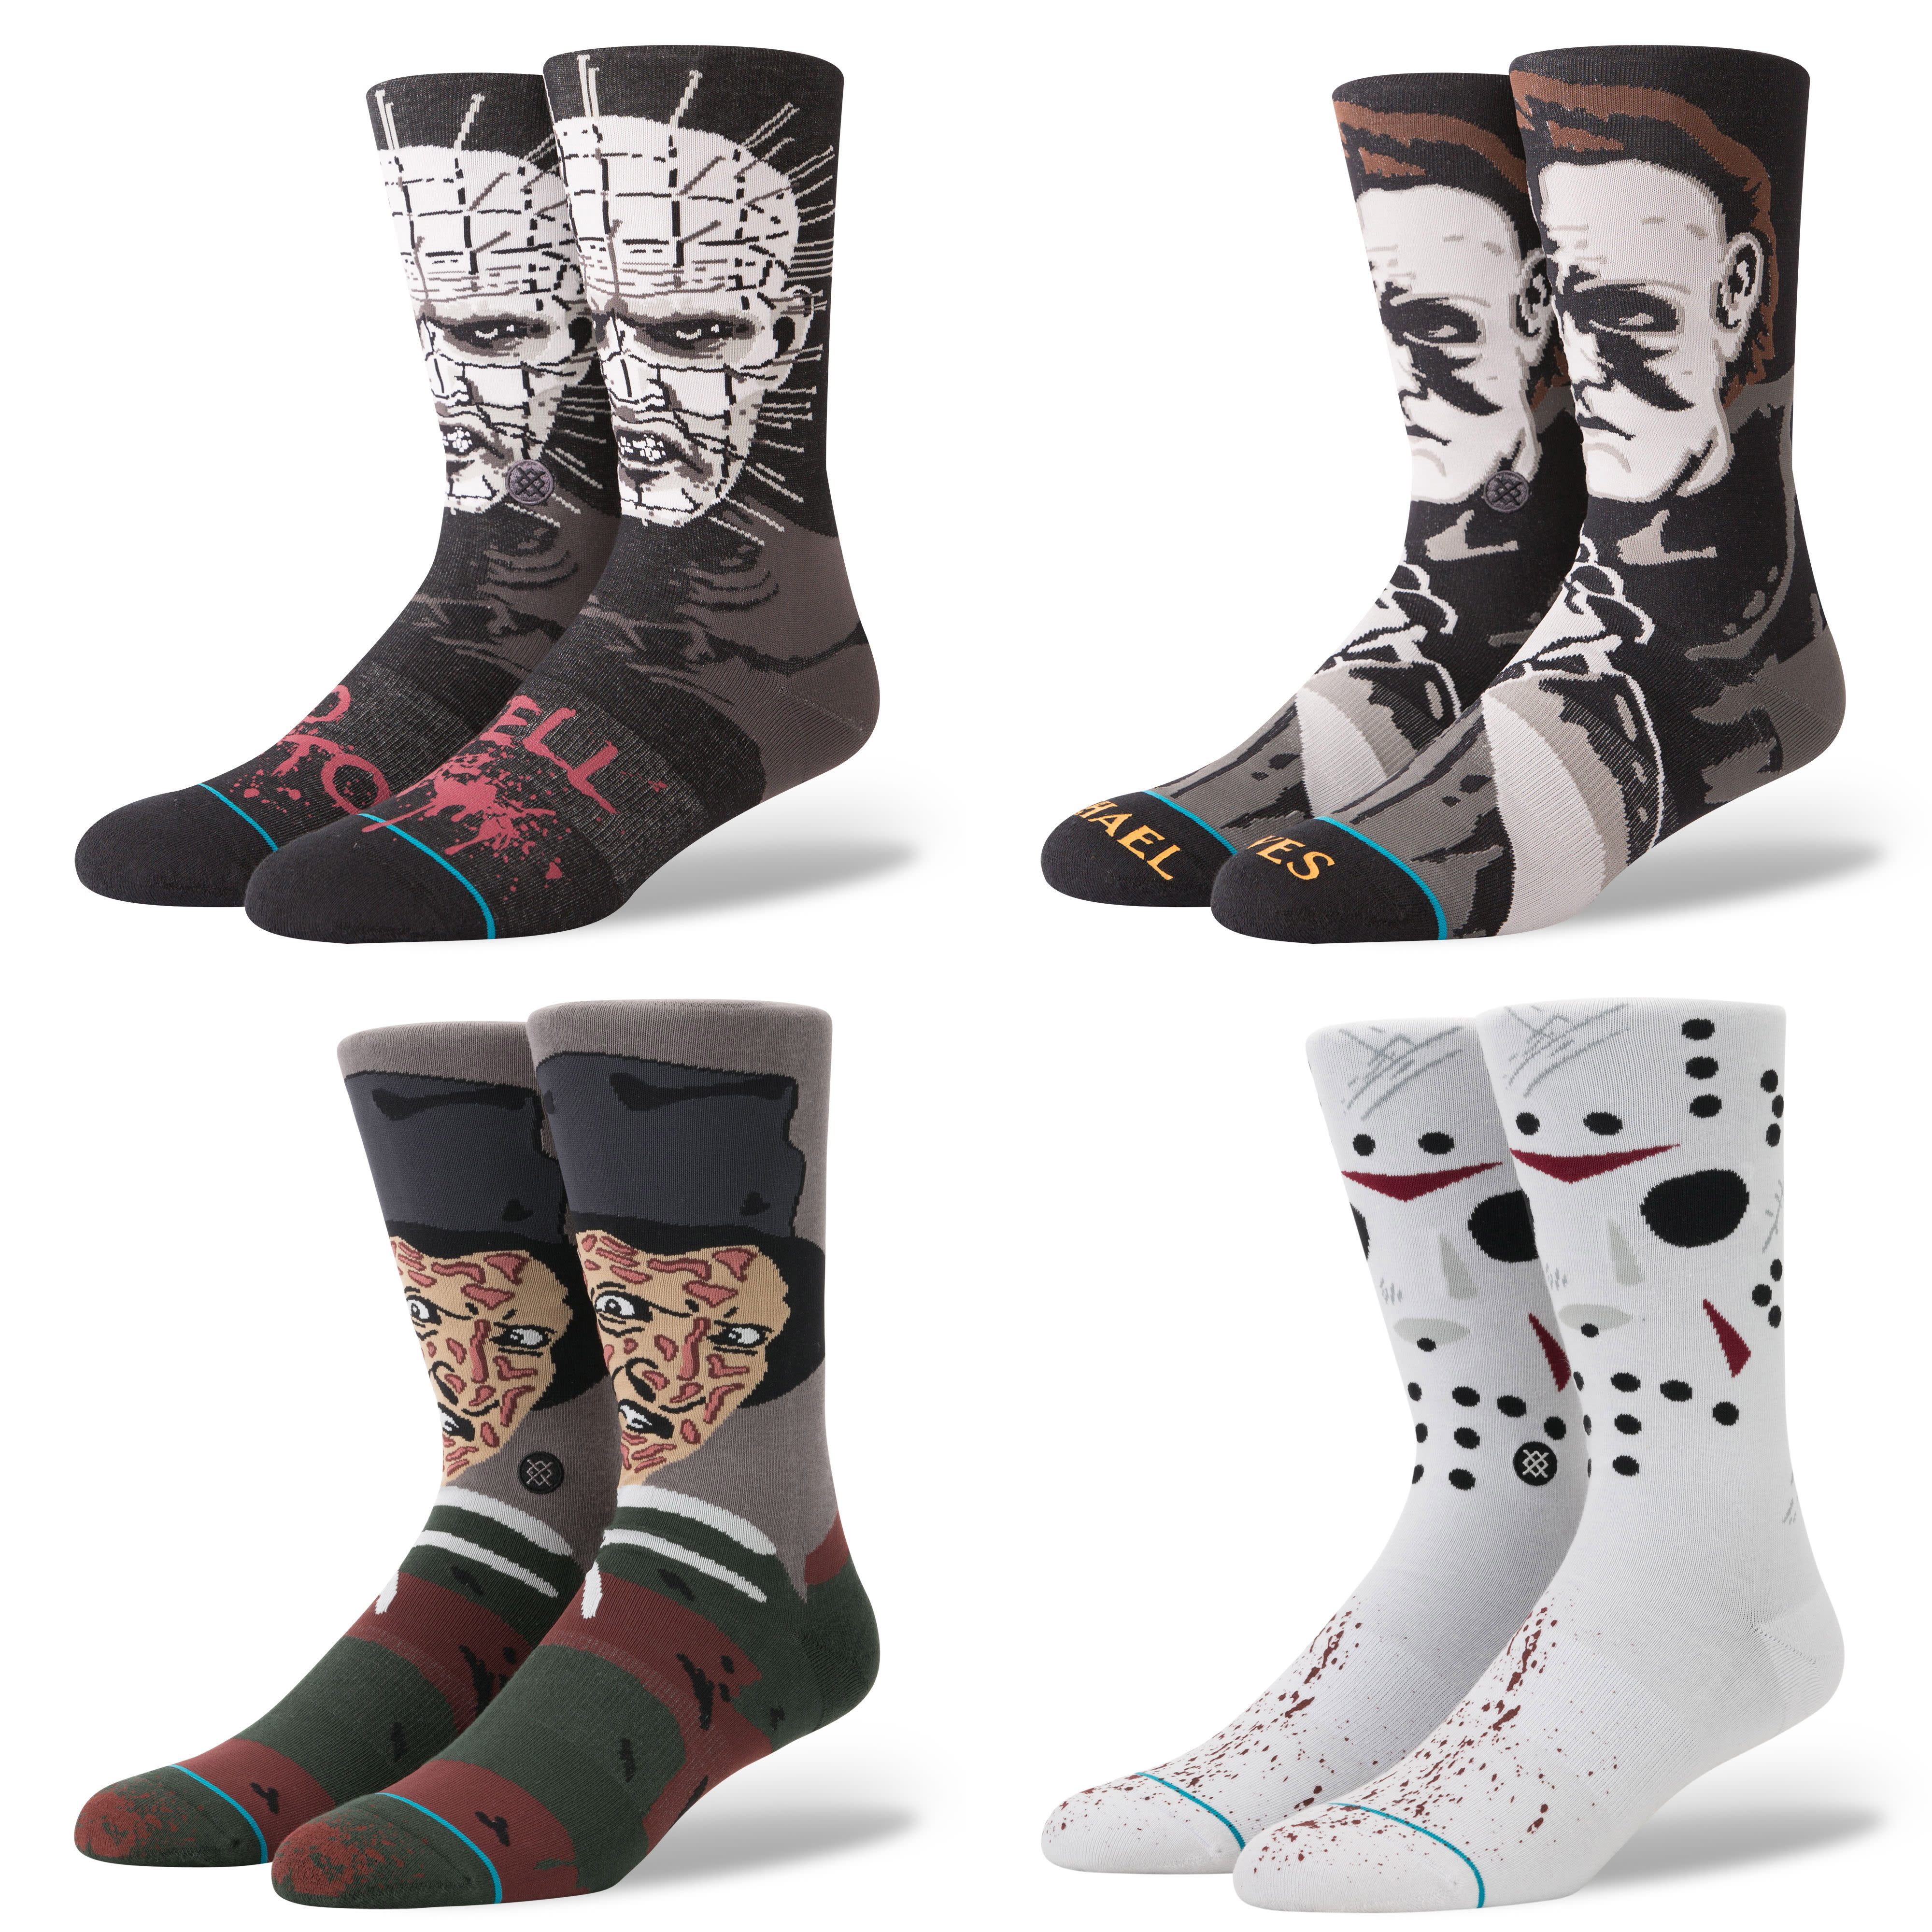 Stance Has Released A New Collection Of Halloween-Themed Socks